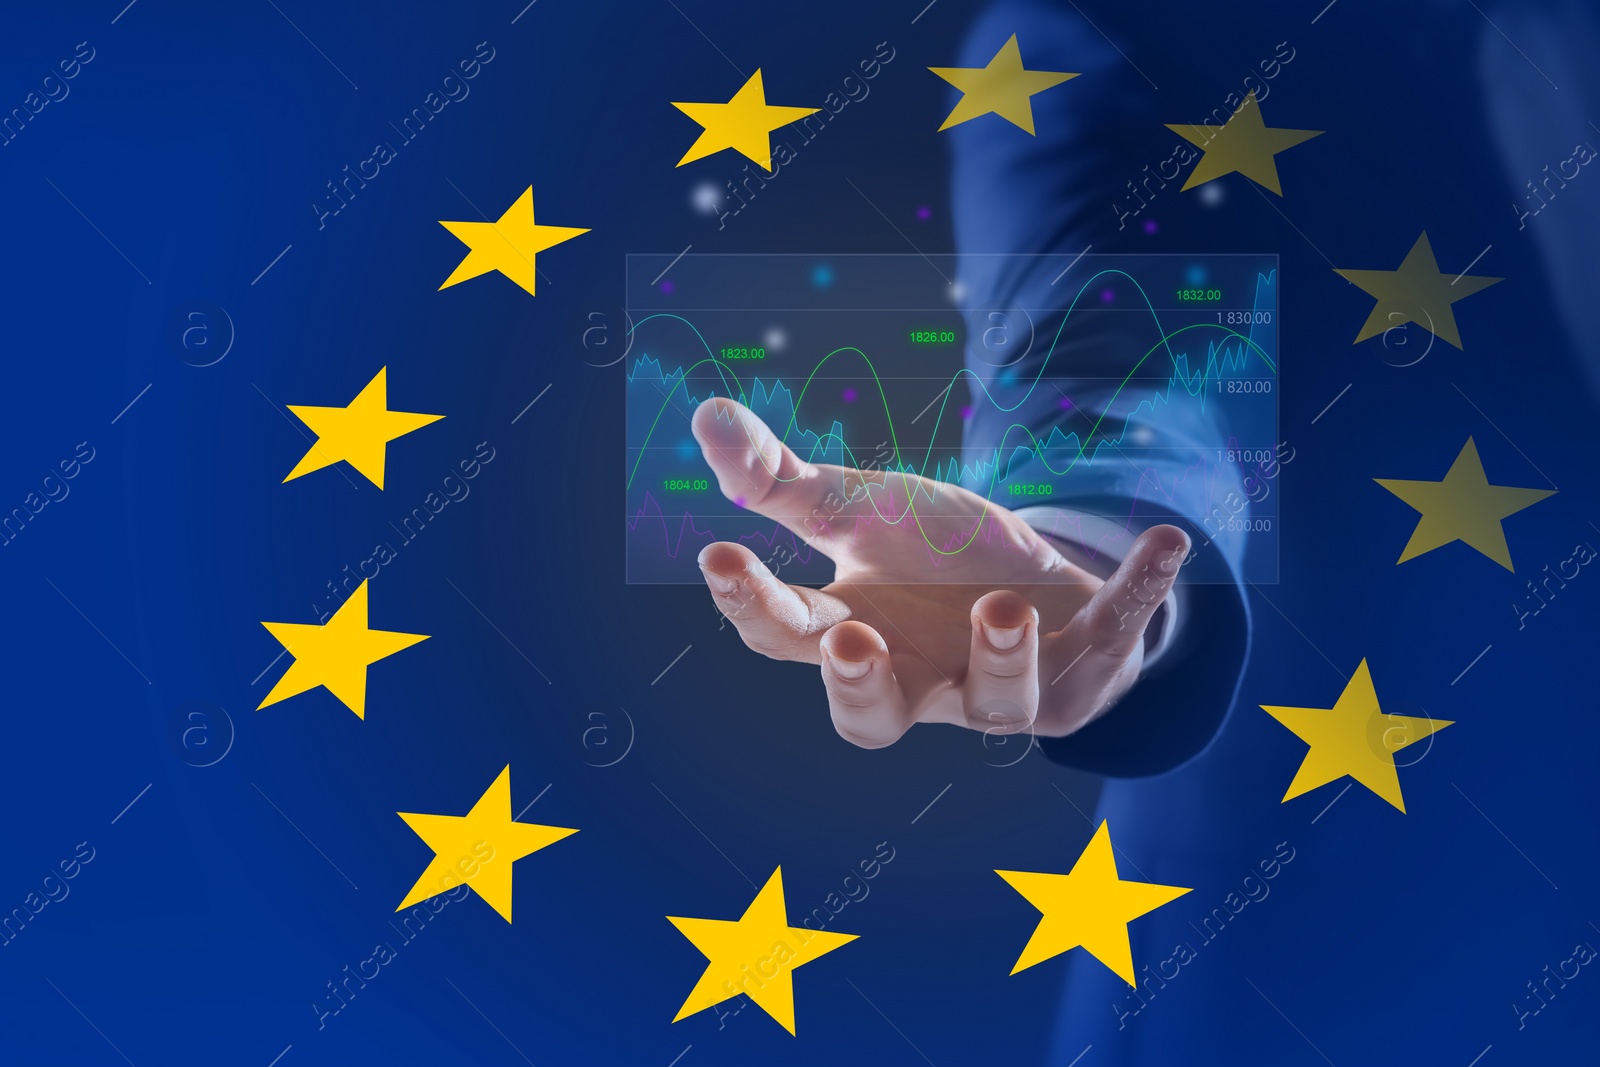 Image of Stock exchange. Double exposure with European flag and man holding digital trading graphs